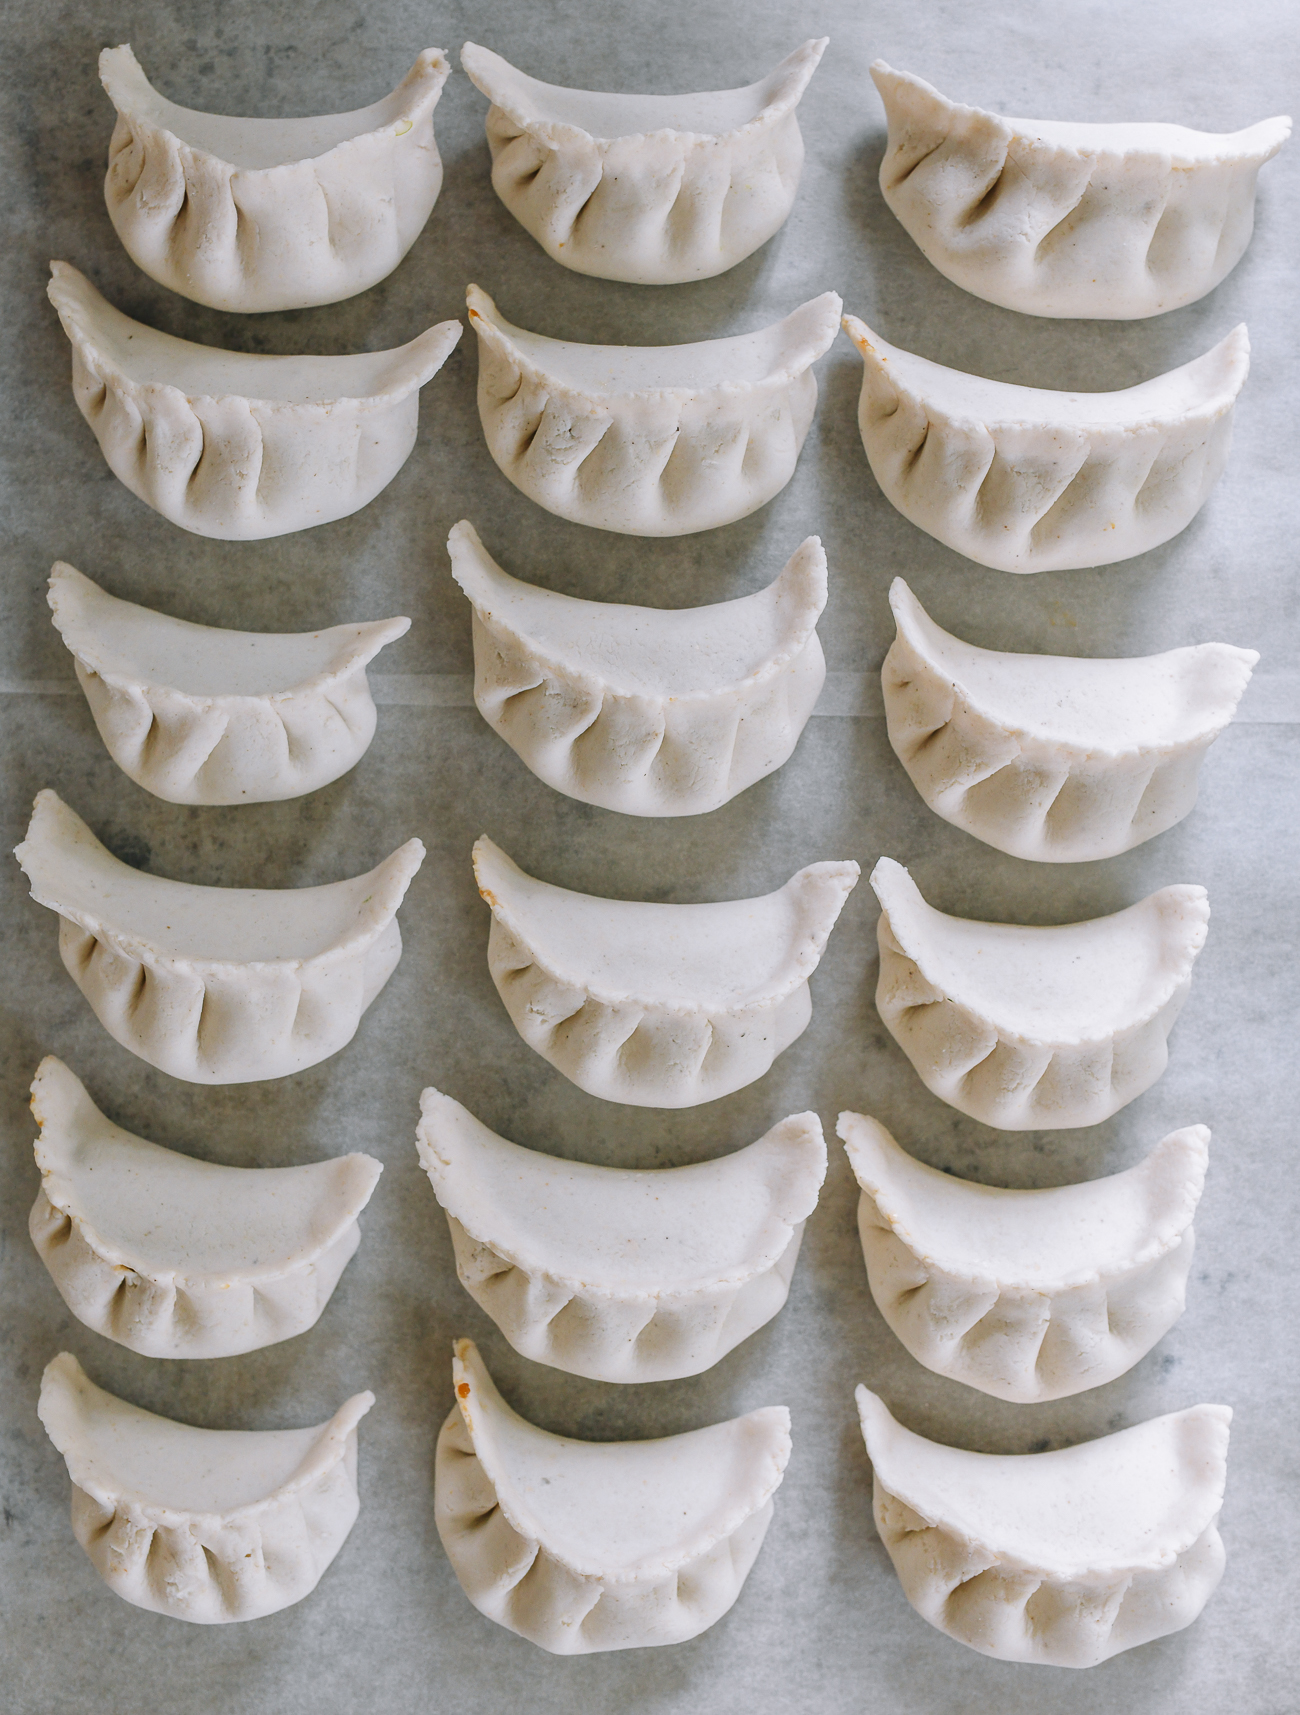 assembled gluten-free dumplings on parchment paper lined tray